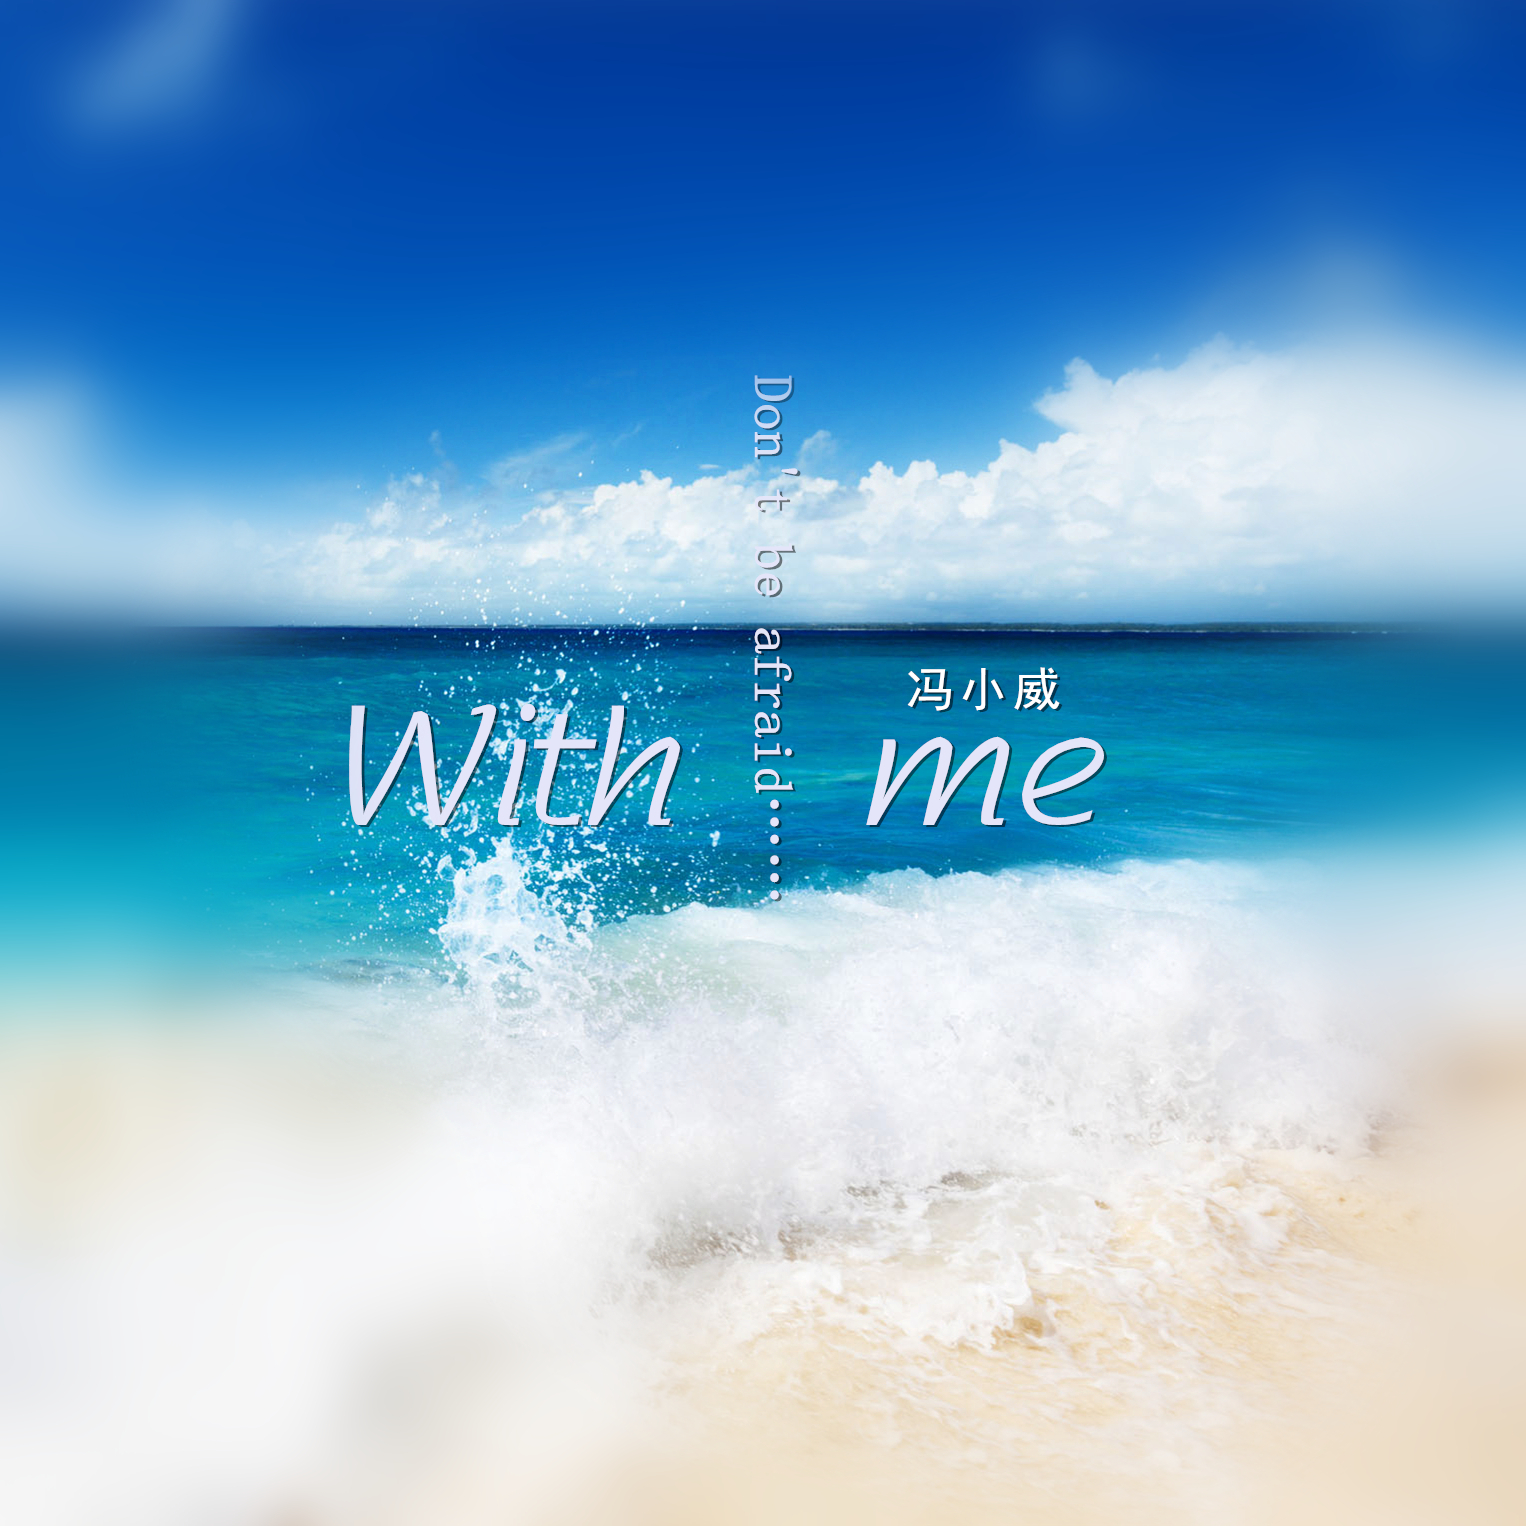 with me(《With me》馮小威音樂作品)